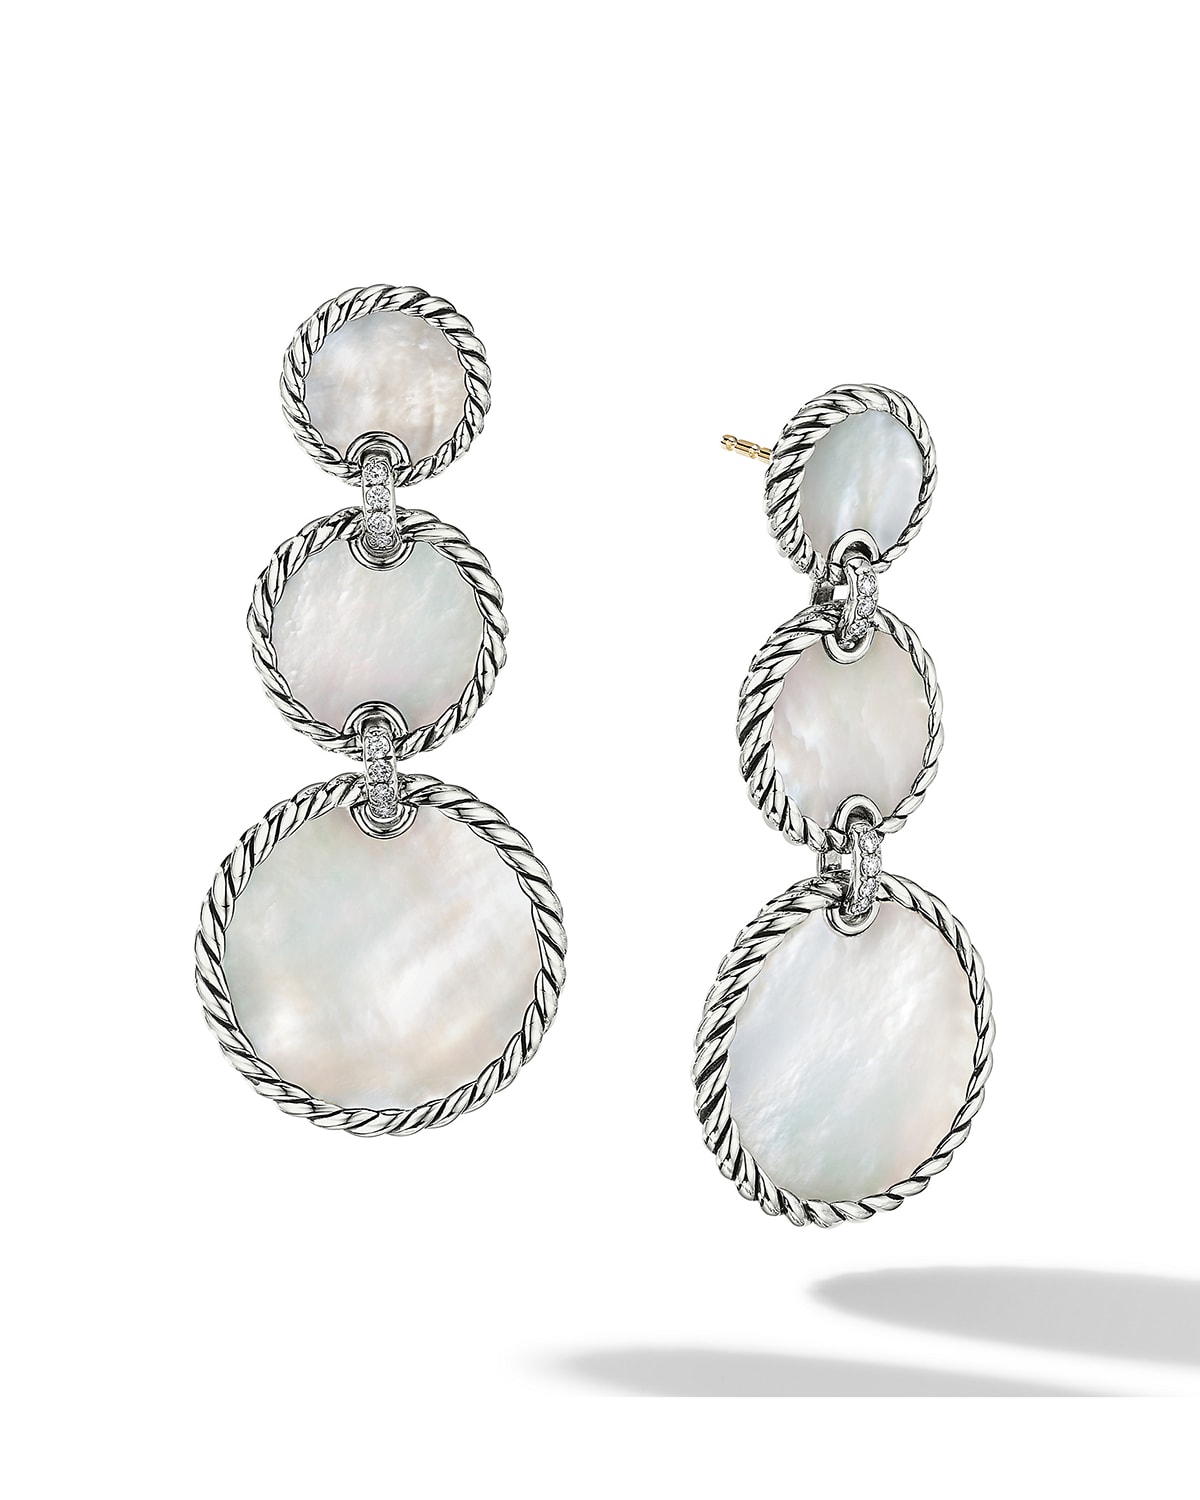 DAVID YURMAN DY ELEMENTS TRIPLE DROP EARRINGS WITH MOTHER-OF-PEARL AND PAVE DIAMONDS